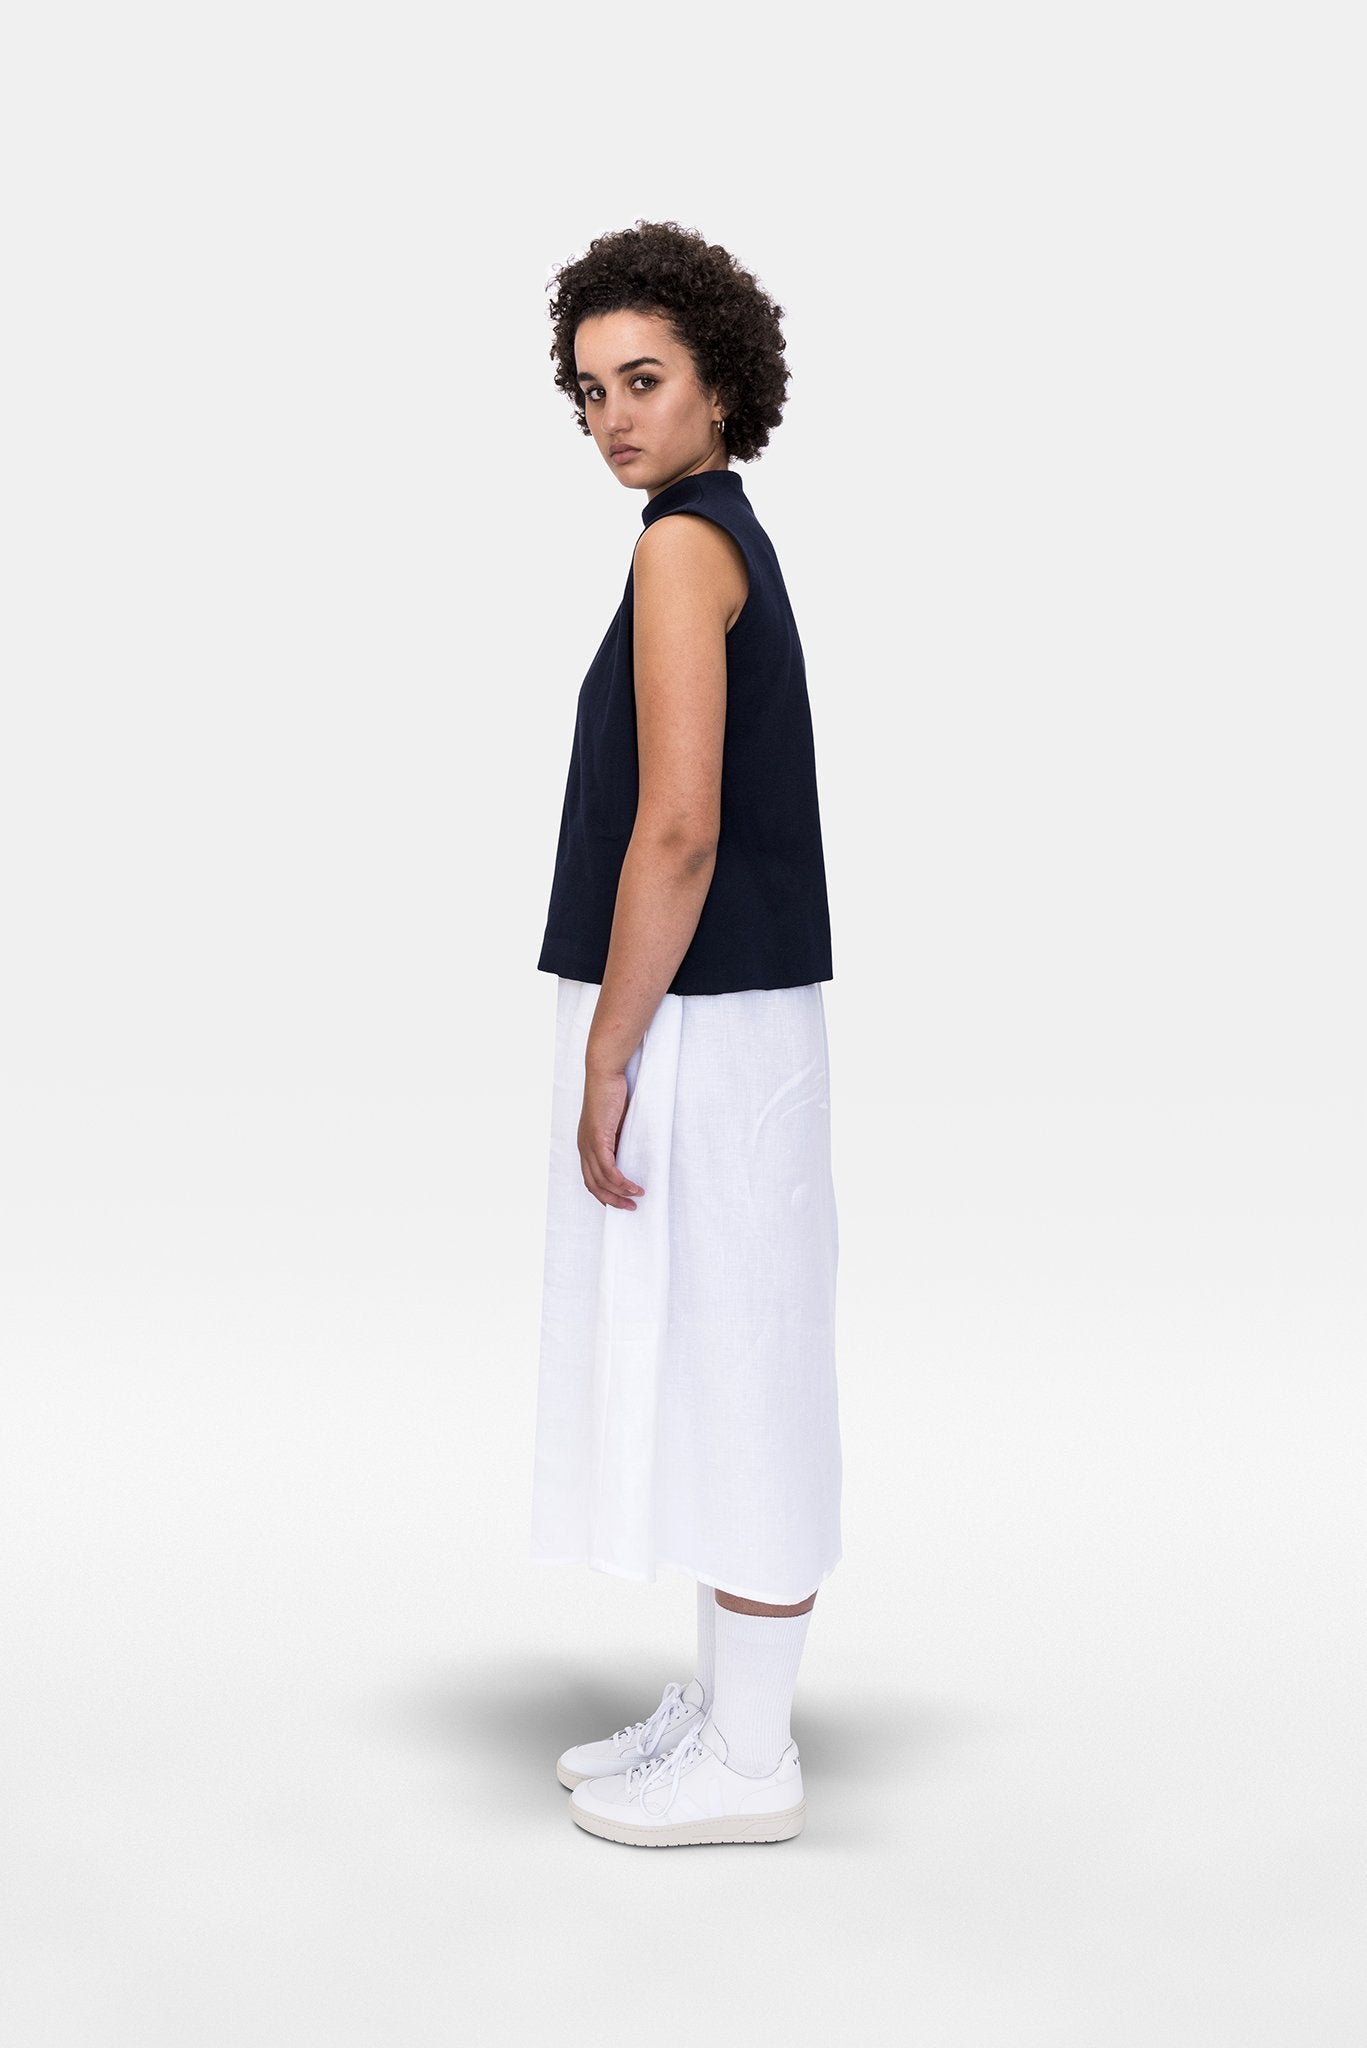 A.BCH A.14 Navy Sleeveless Skivvy in Organic Cotton